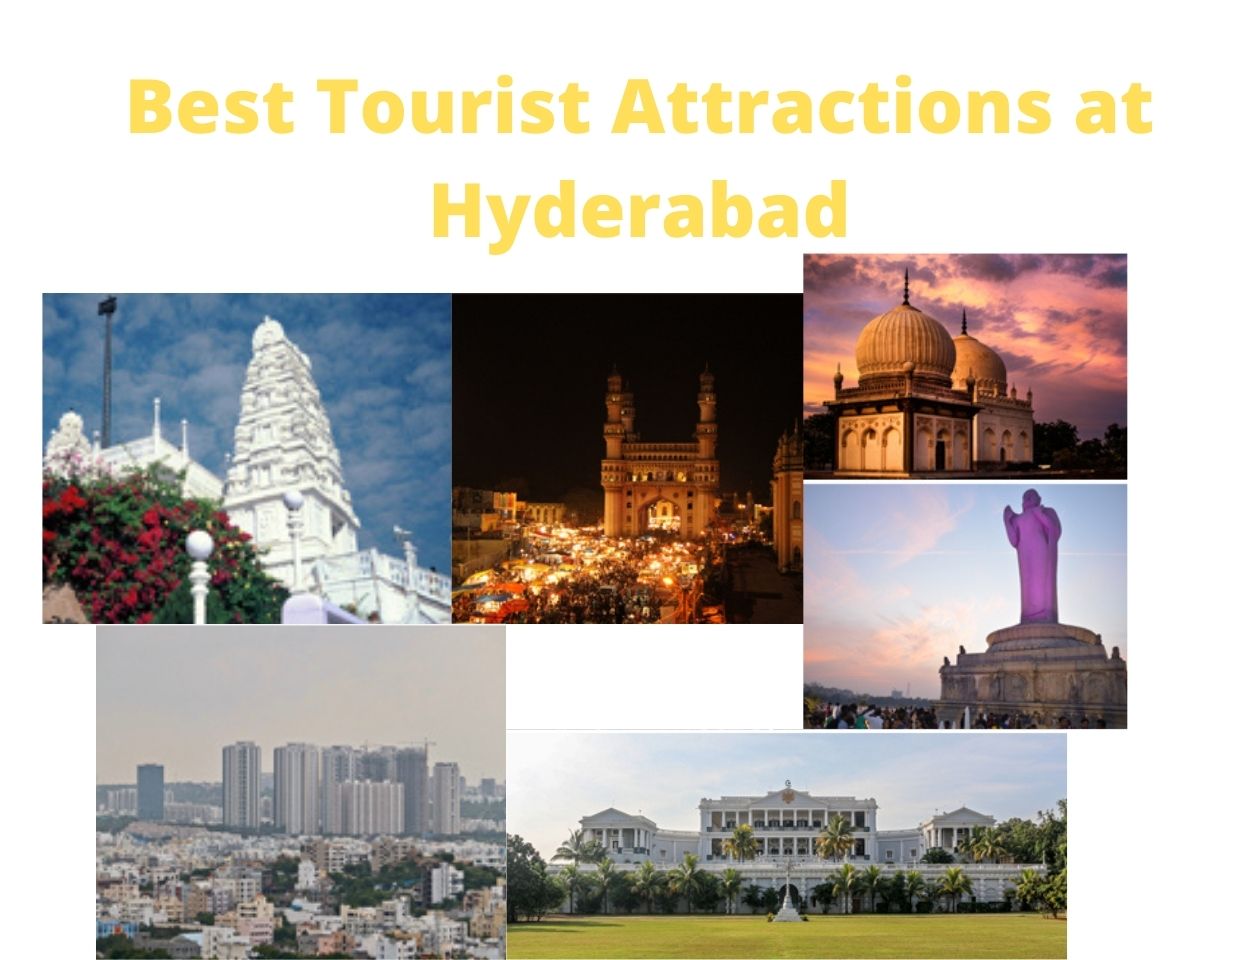 Best-Tourist-Attractions-at-Hyderabad